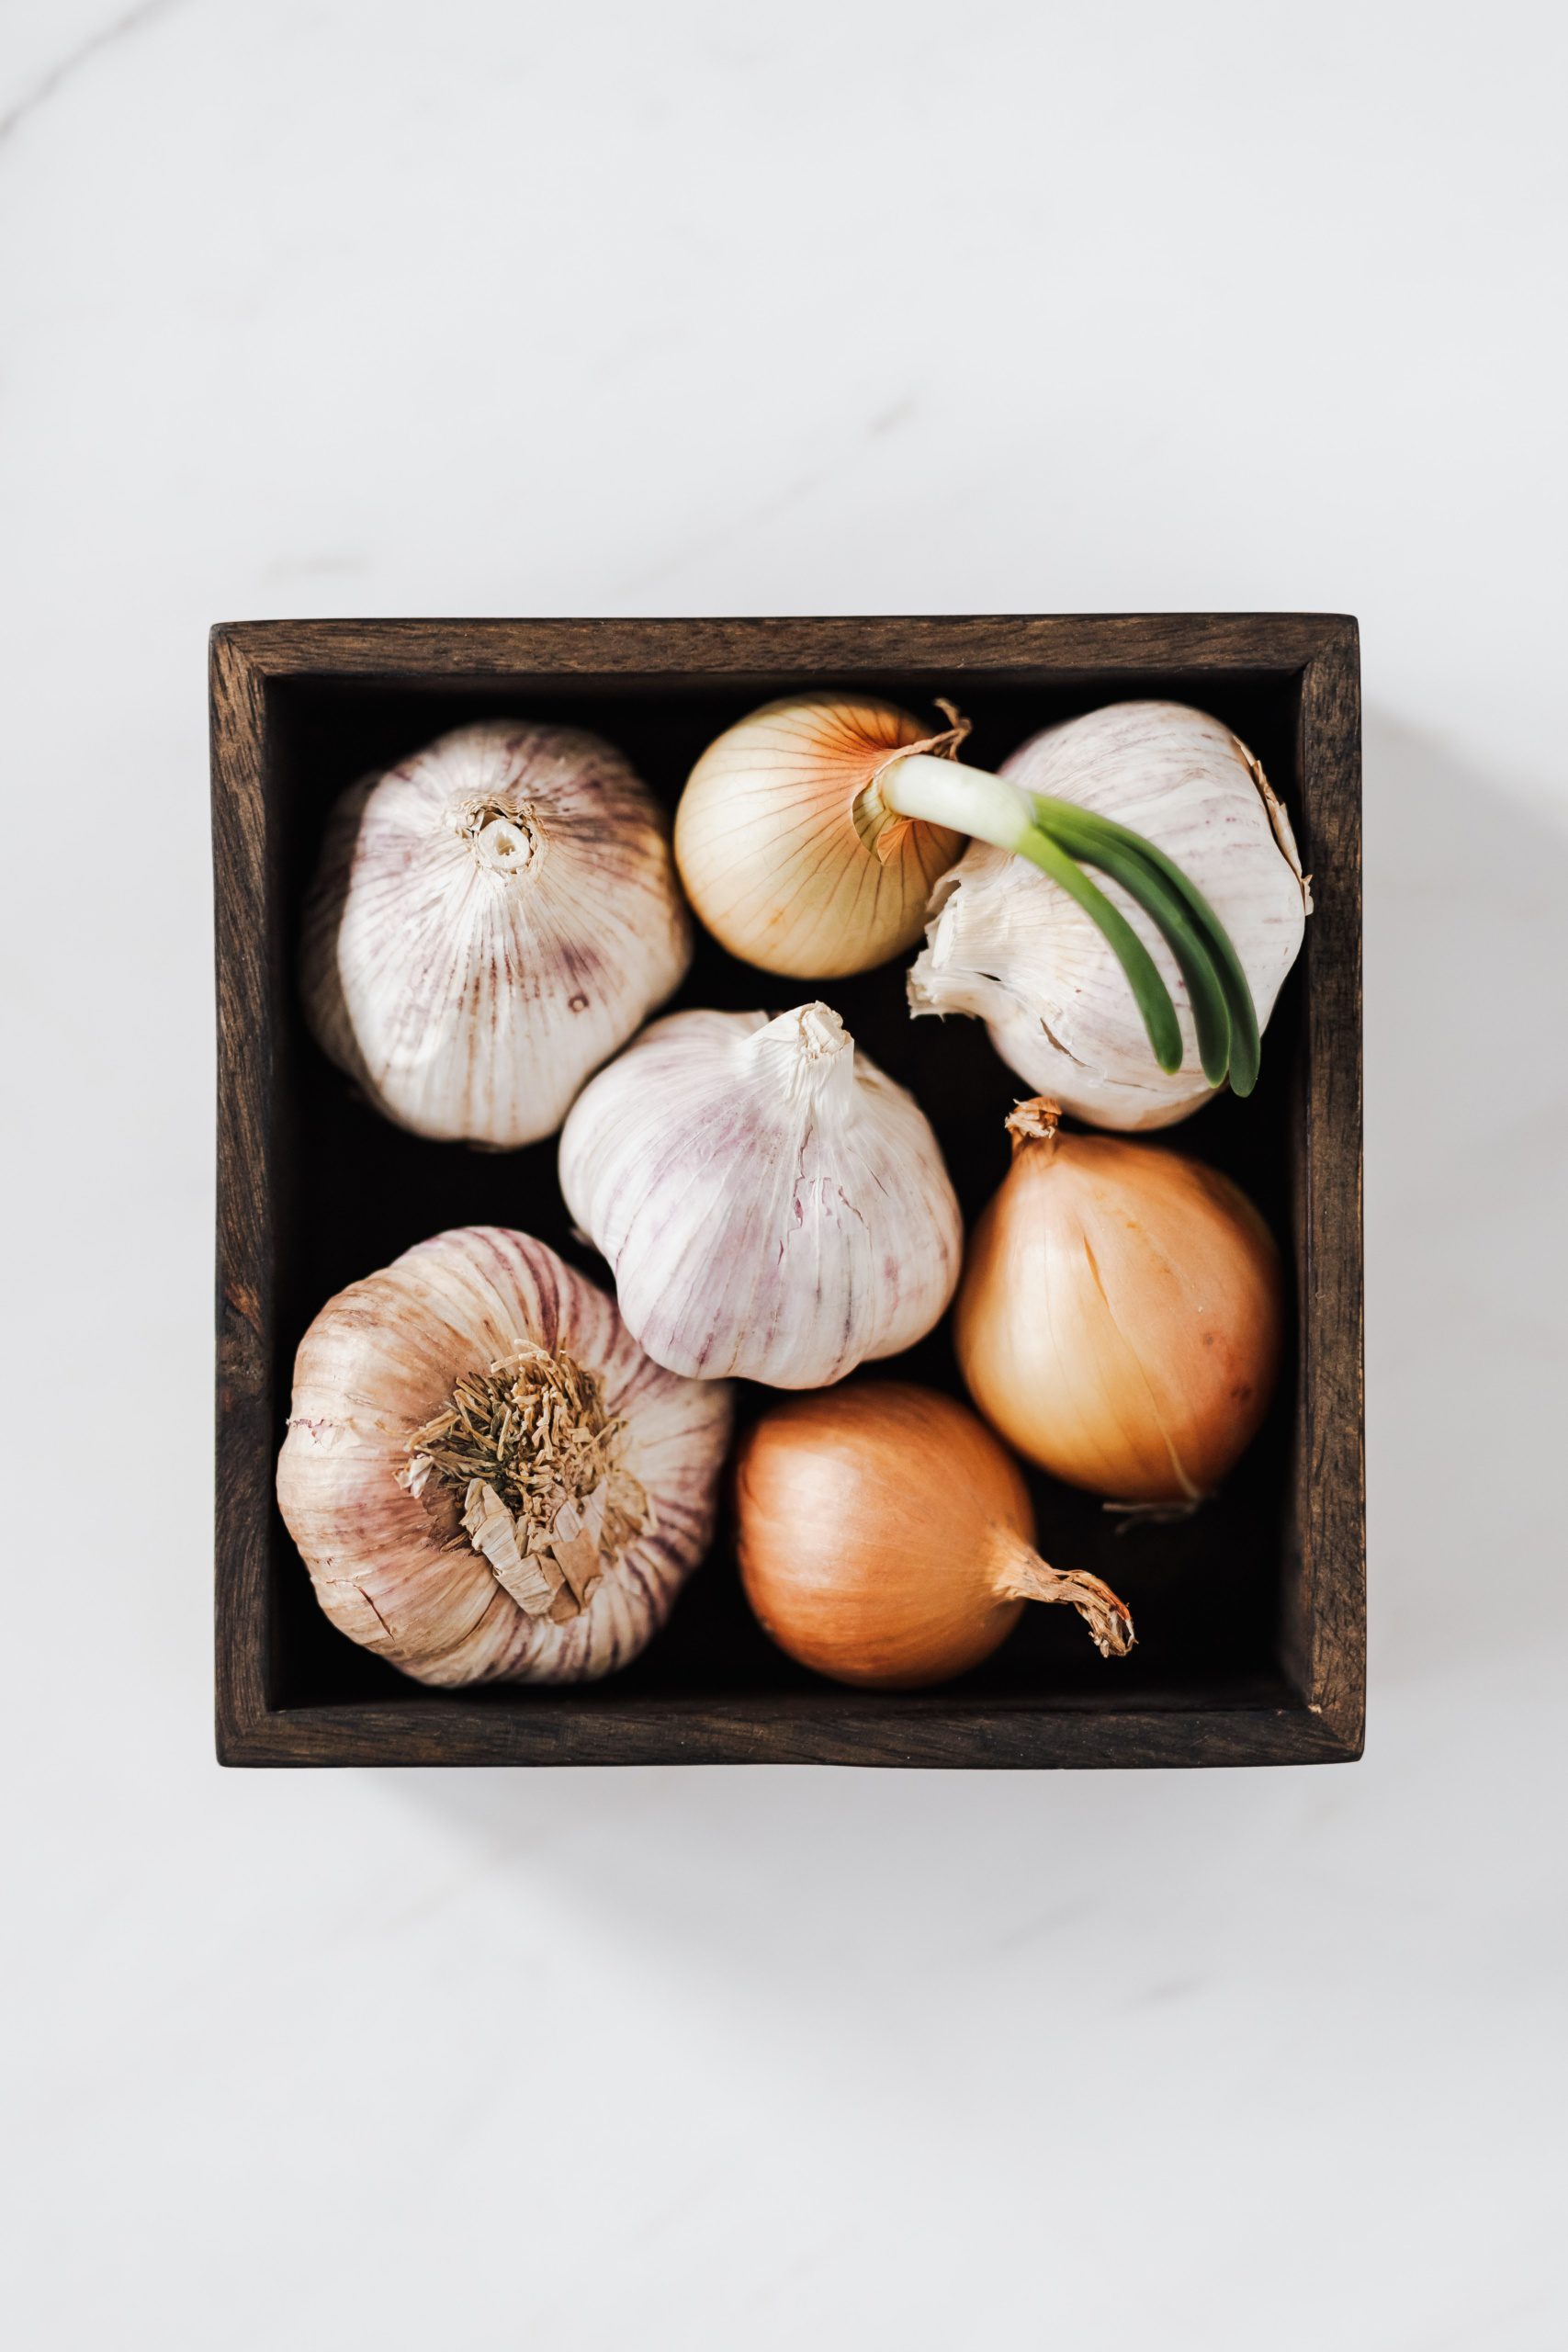 Onions and garlic - 24 Harmful Foods For Pets